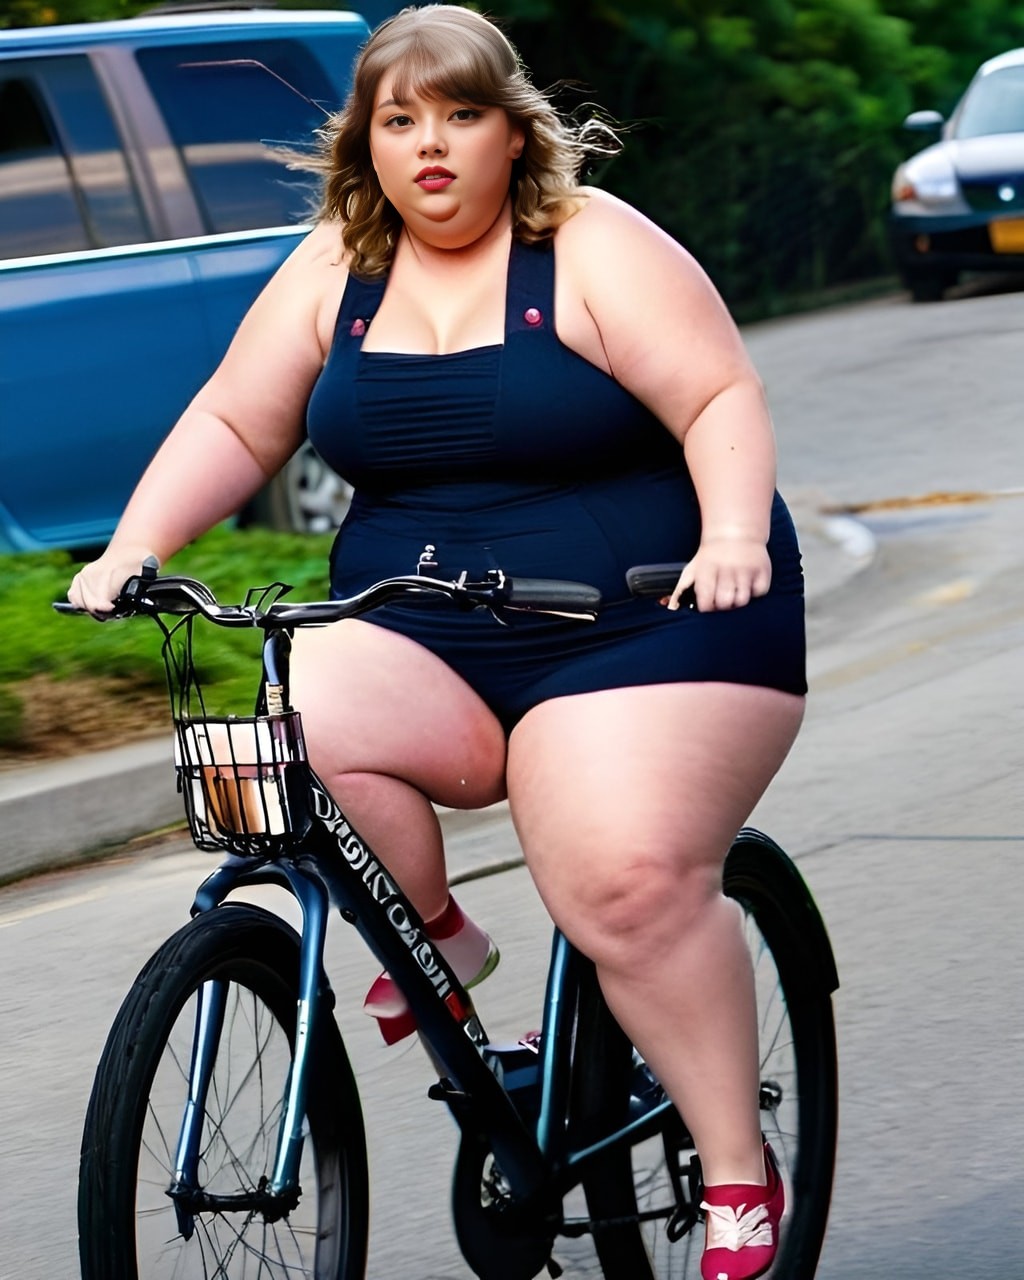 in a swimsuit riding a bike